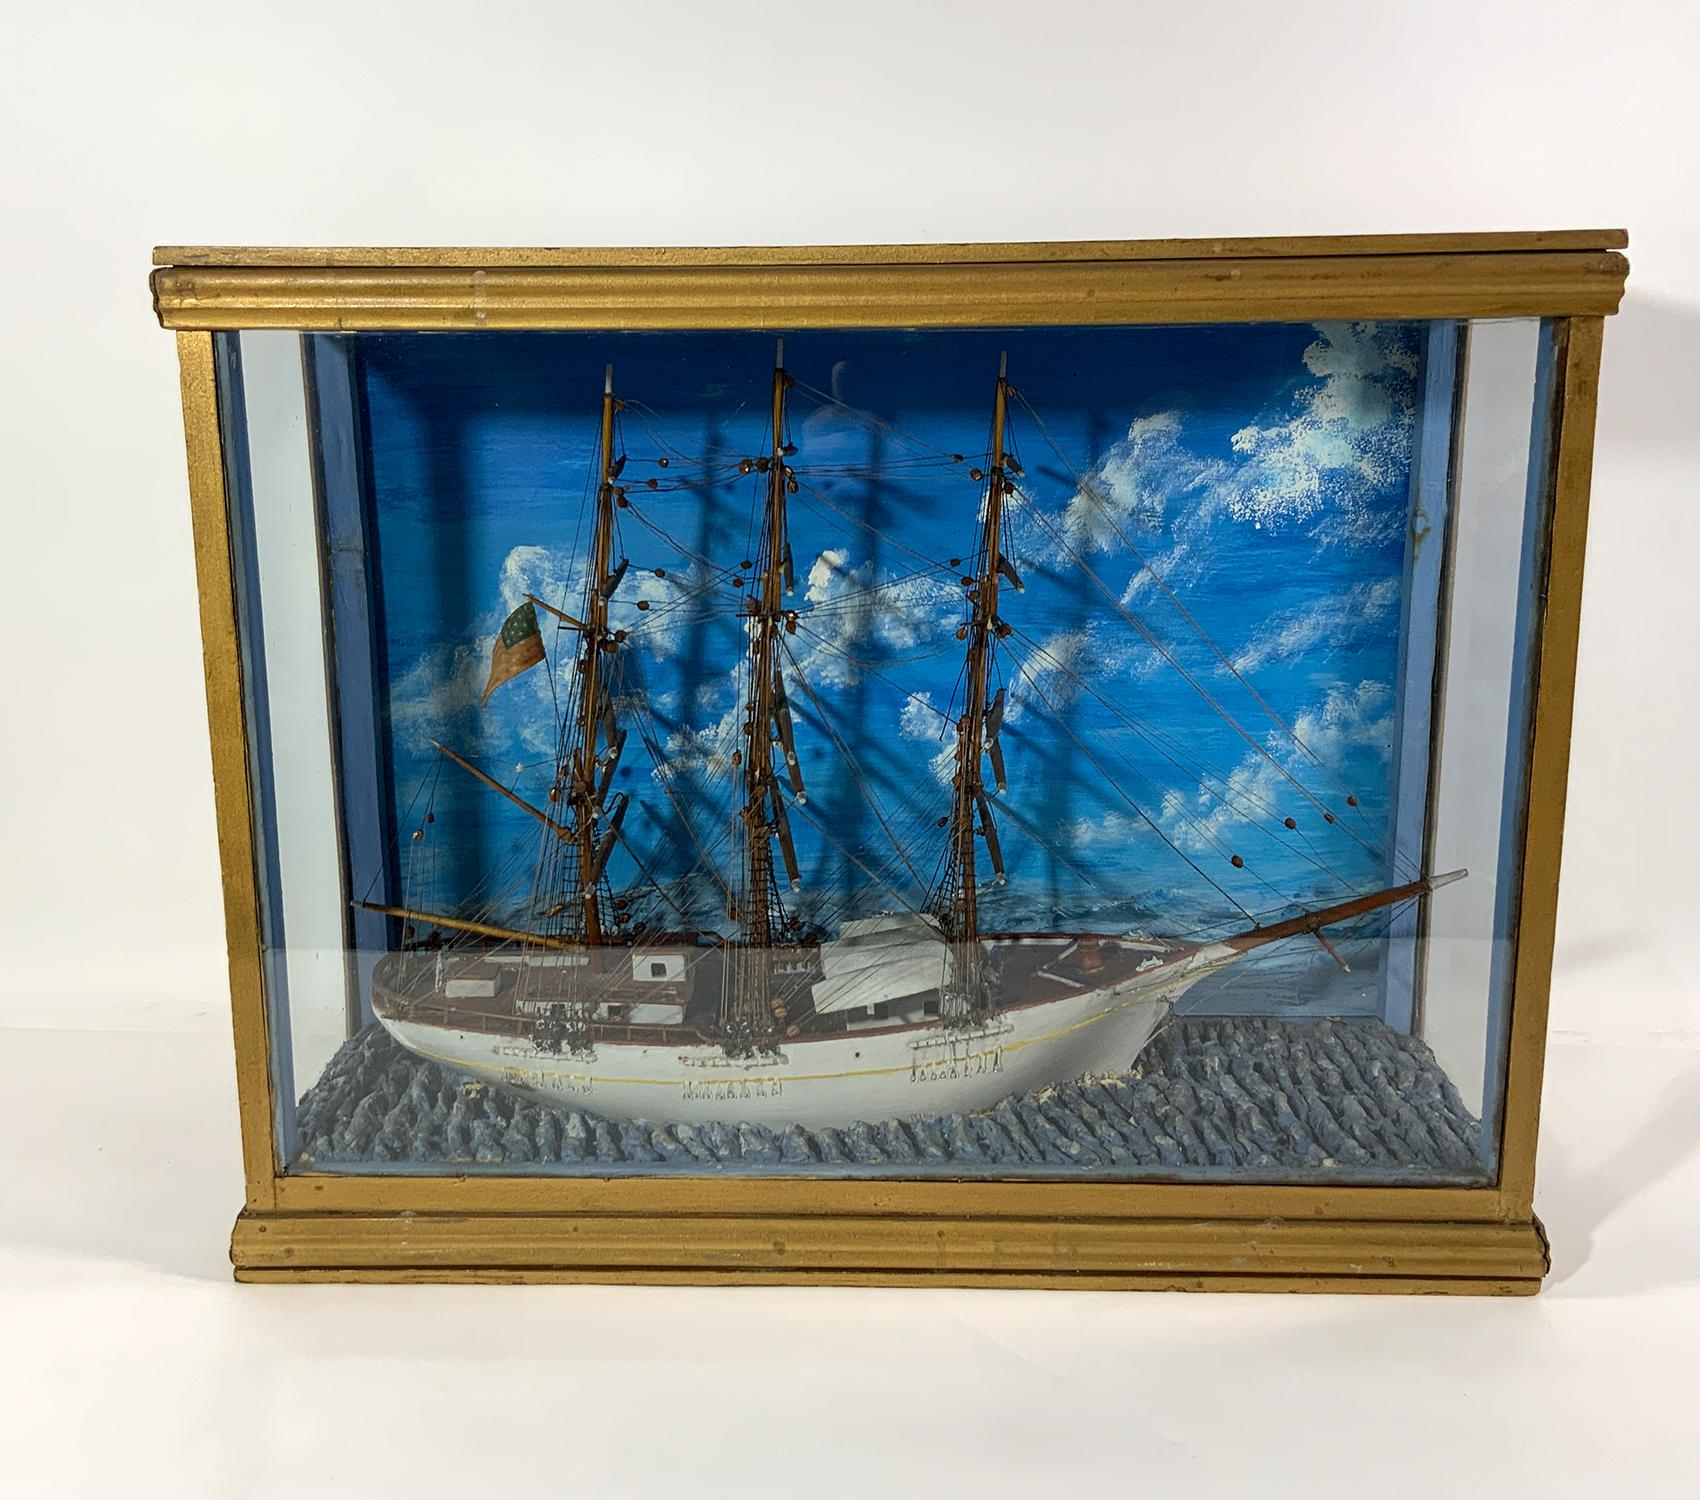 Cased diorama of a three masthead clipper ship. Fully rigged with fifteen spars on the three masts. Deck details include built up cabins, hatched, capstan, wheel house, cleats, clocks, etc.. Set into a clay sea. Painted sky background. Glass case.